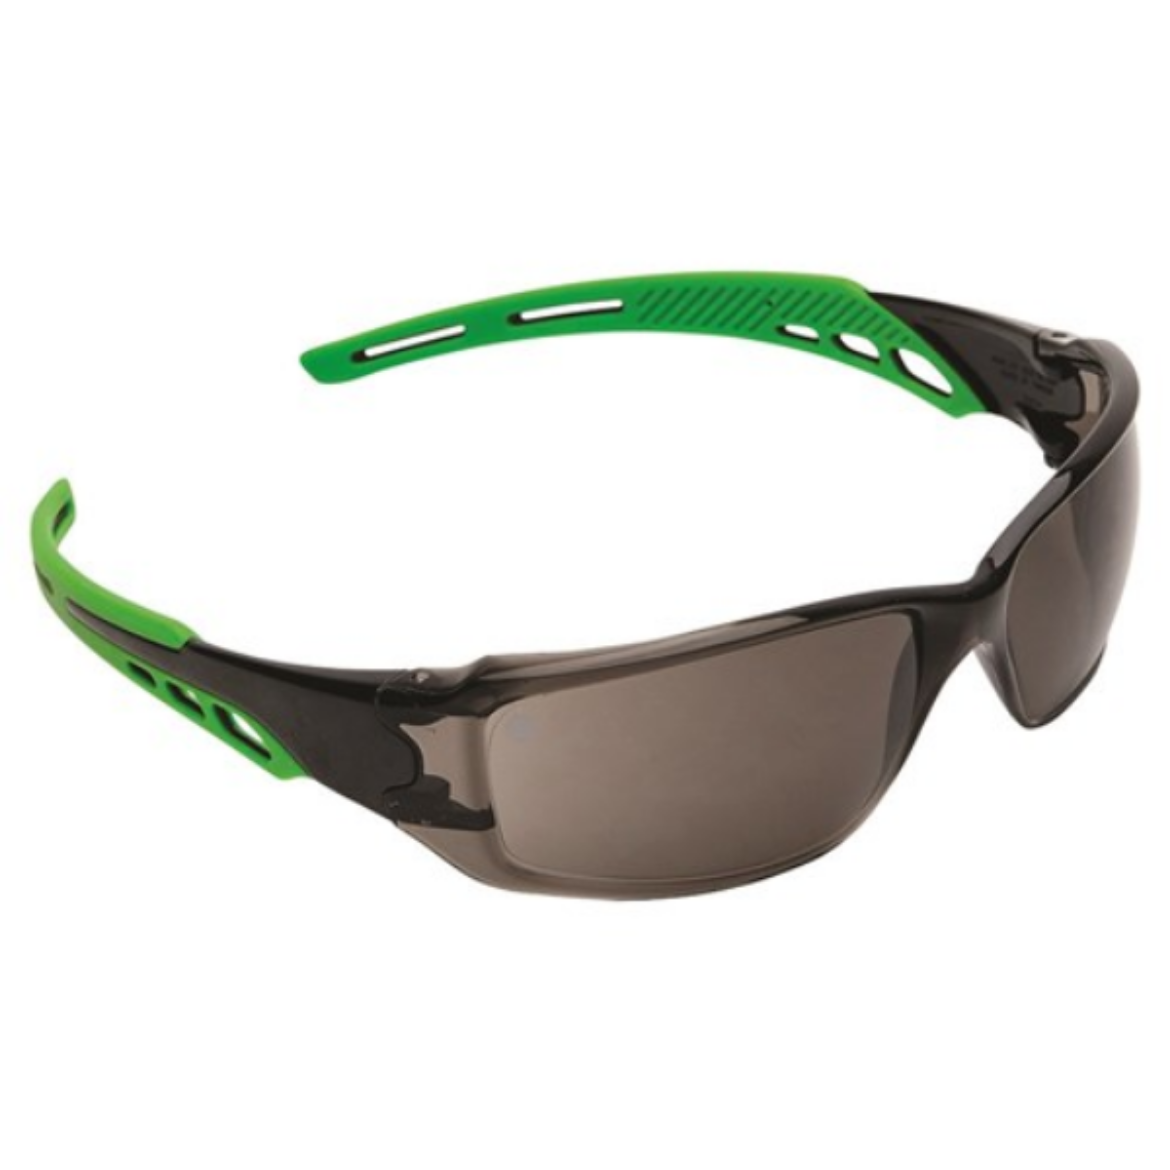 Picture of CIRRUS - SMOKE LENS, ANTI-FOG, POLYCARBONATE FRAME SAFETY GLASSES WITH SOFT GREEN ARMS